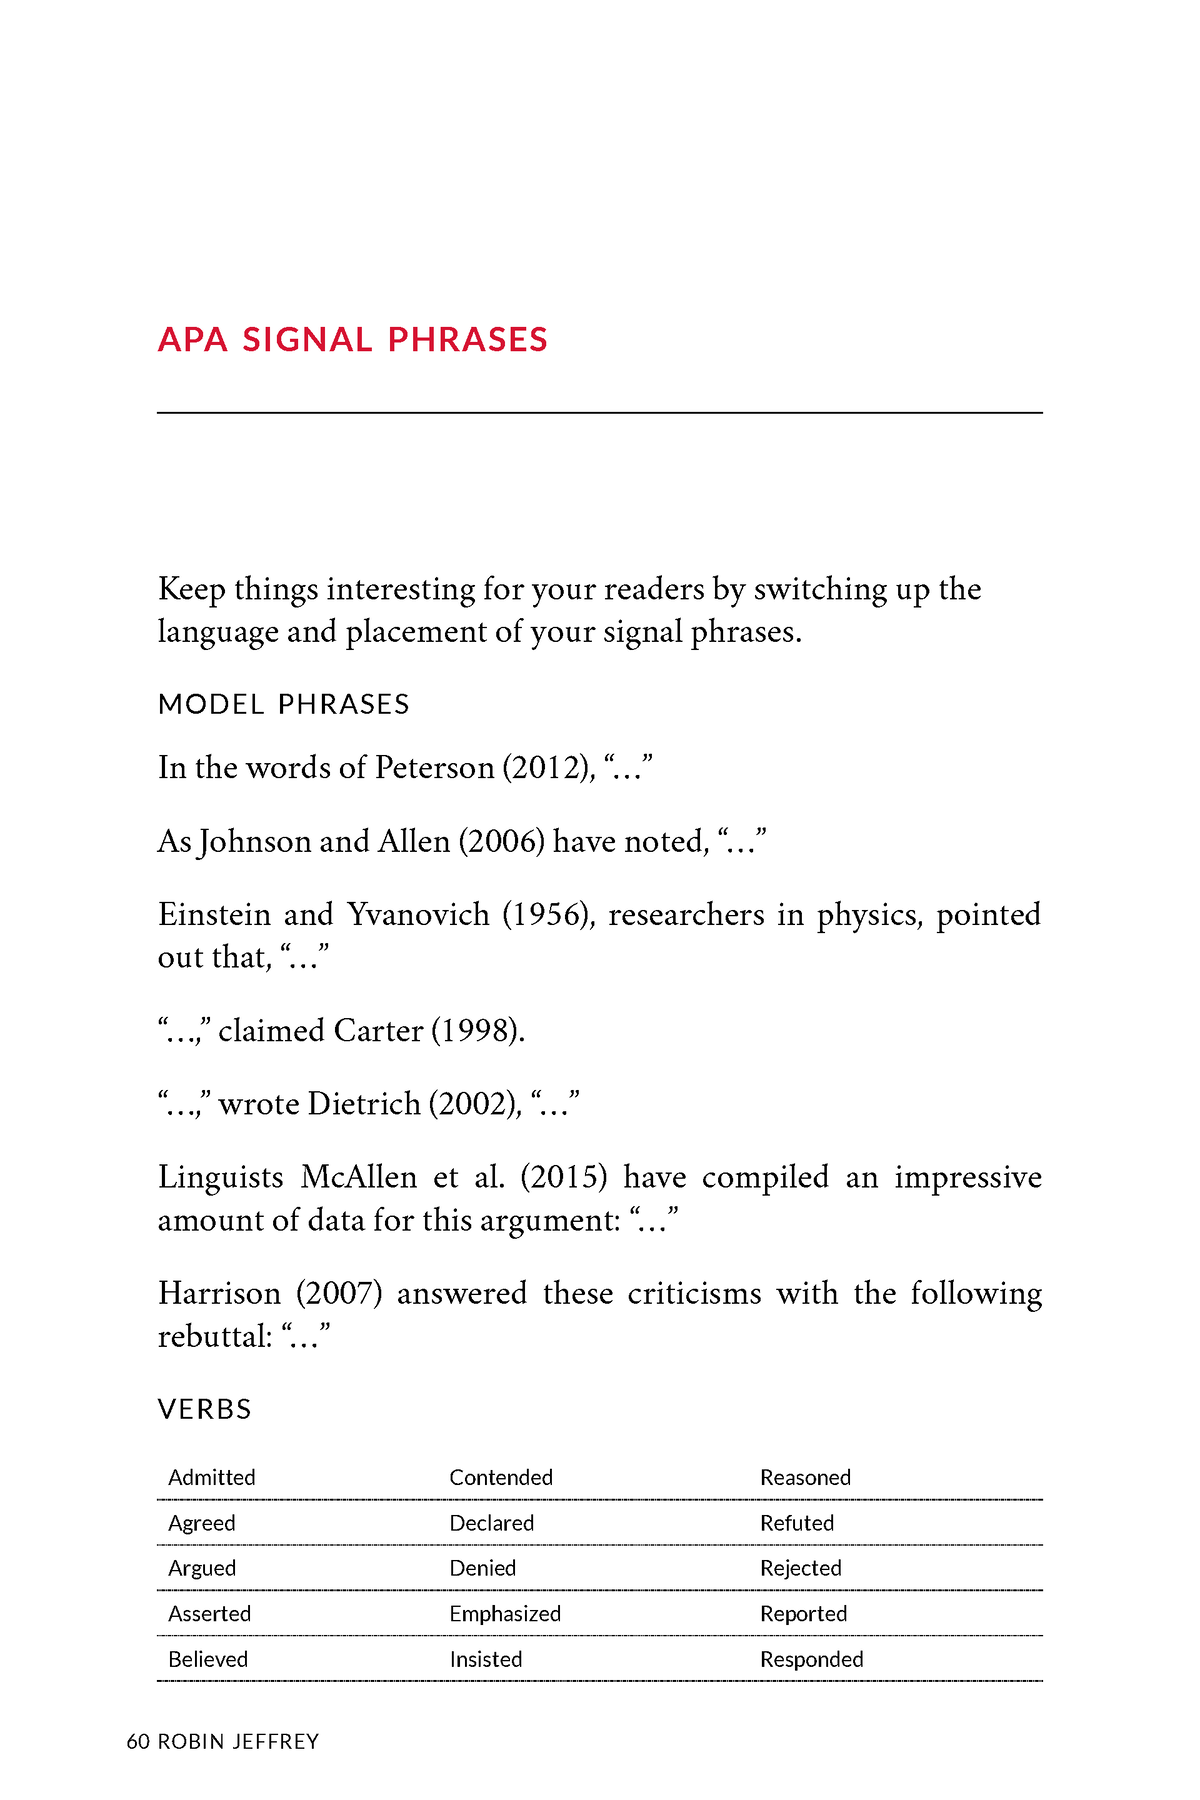 about-writing-a-guide-7-apa-signal-phrases-keep-things-interesting